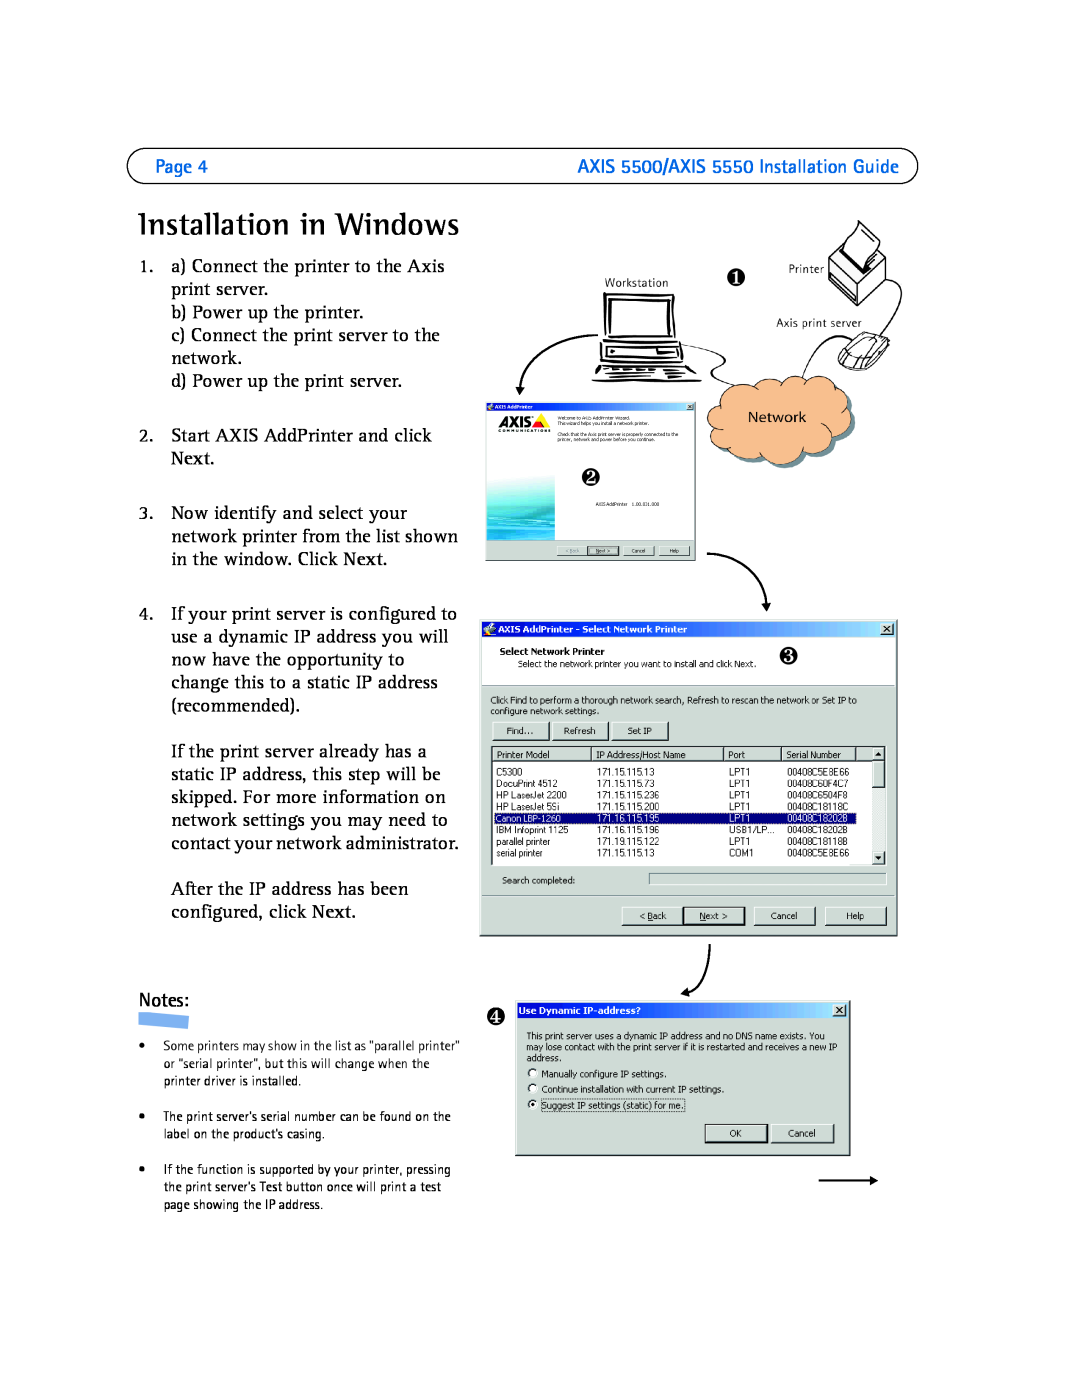 Axis Communications manual Installation in Windows, ❶ ❷ ❸, Page, AXIS 5500/AXIS 5550 Installation Guide 